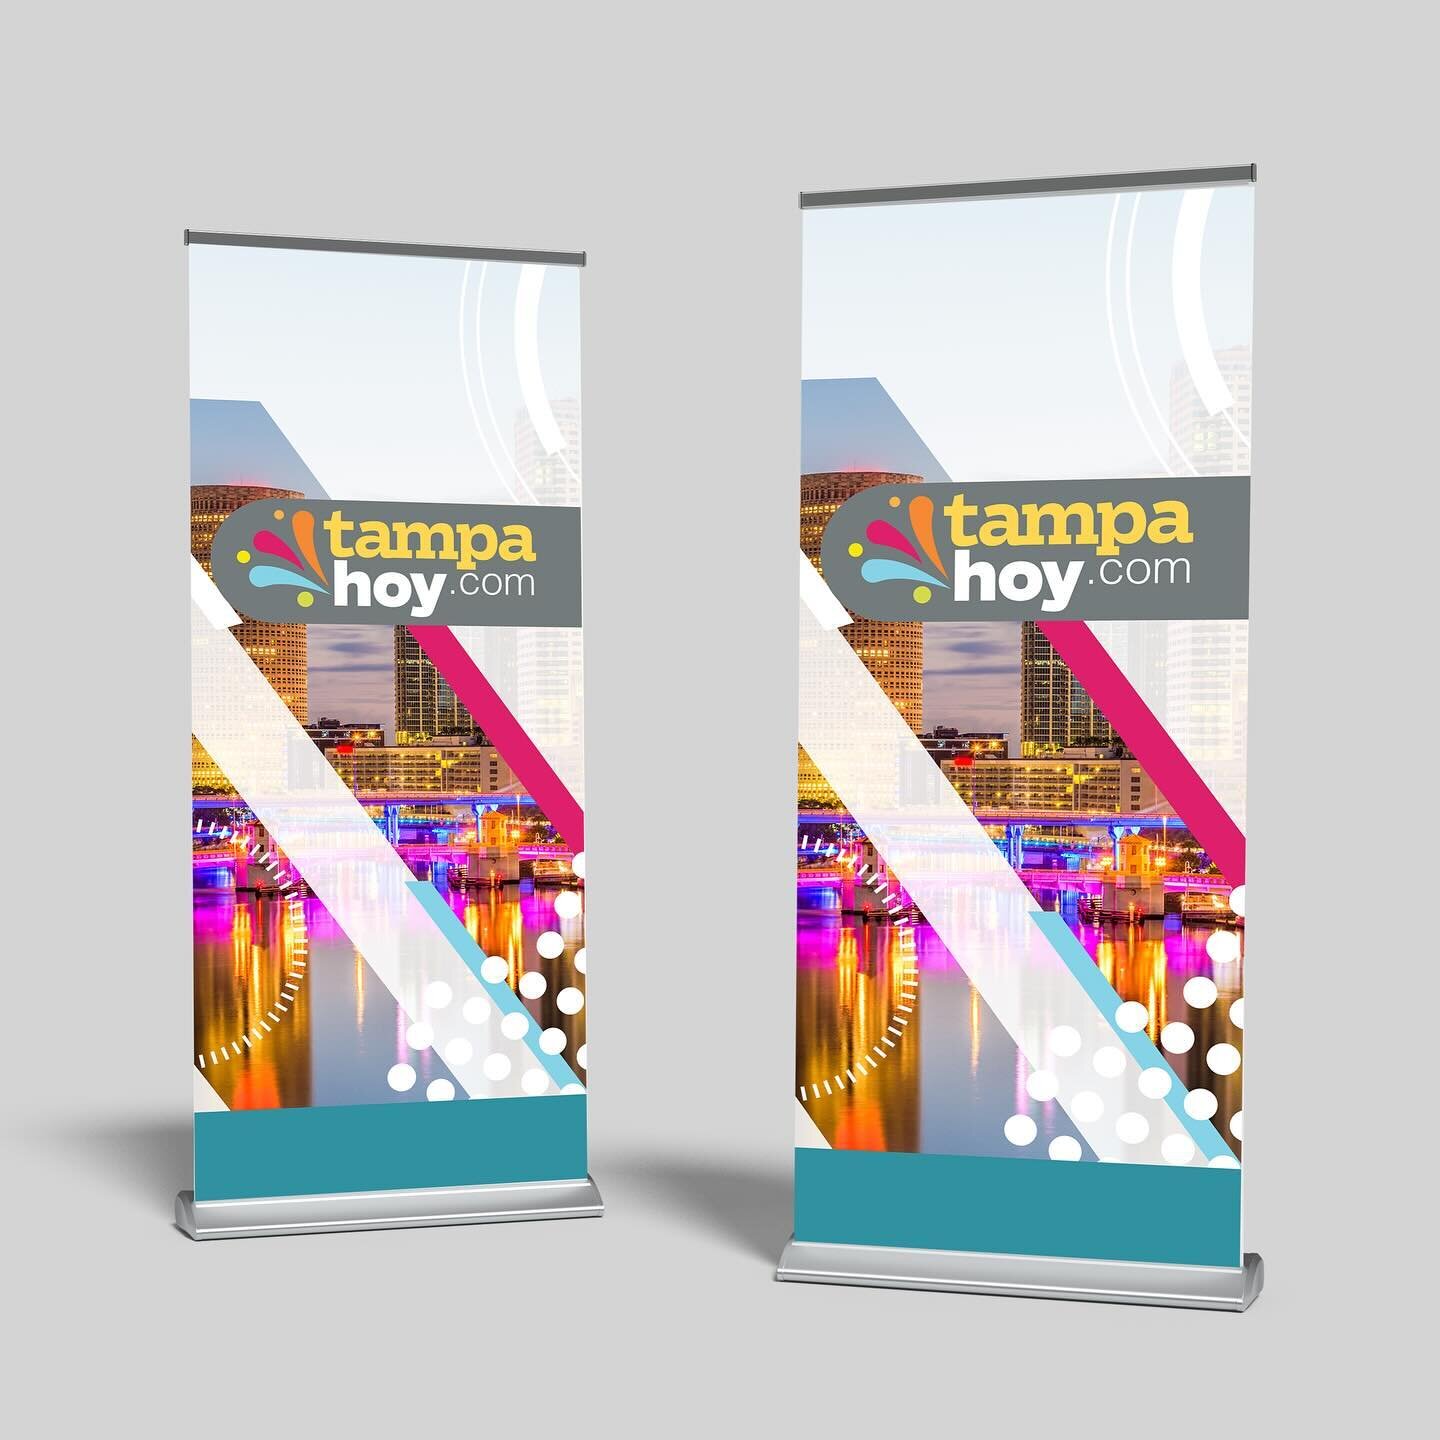 Pull banners for Hoy! It&rsquo;s all coming together for fan fest.

//Nexstar Media Group //NC8 //WFLA //Tampa Hoy //Banner Design